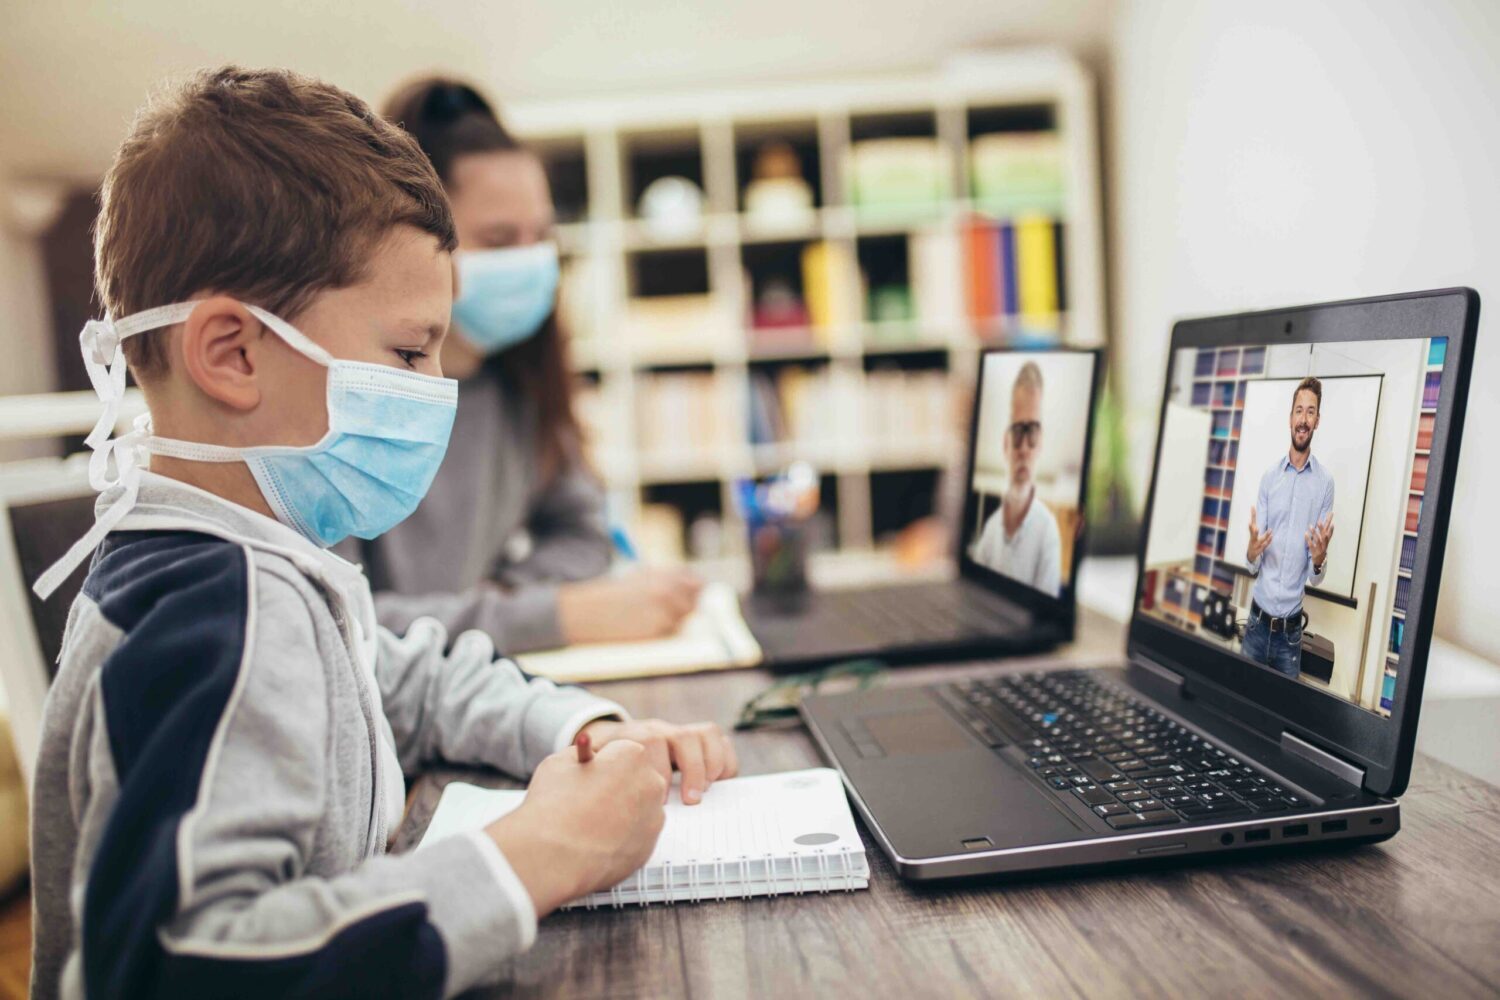 The benefits of educational technology for students with special needs